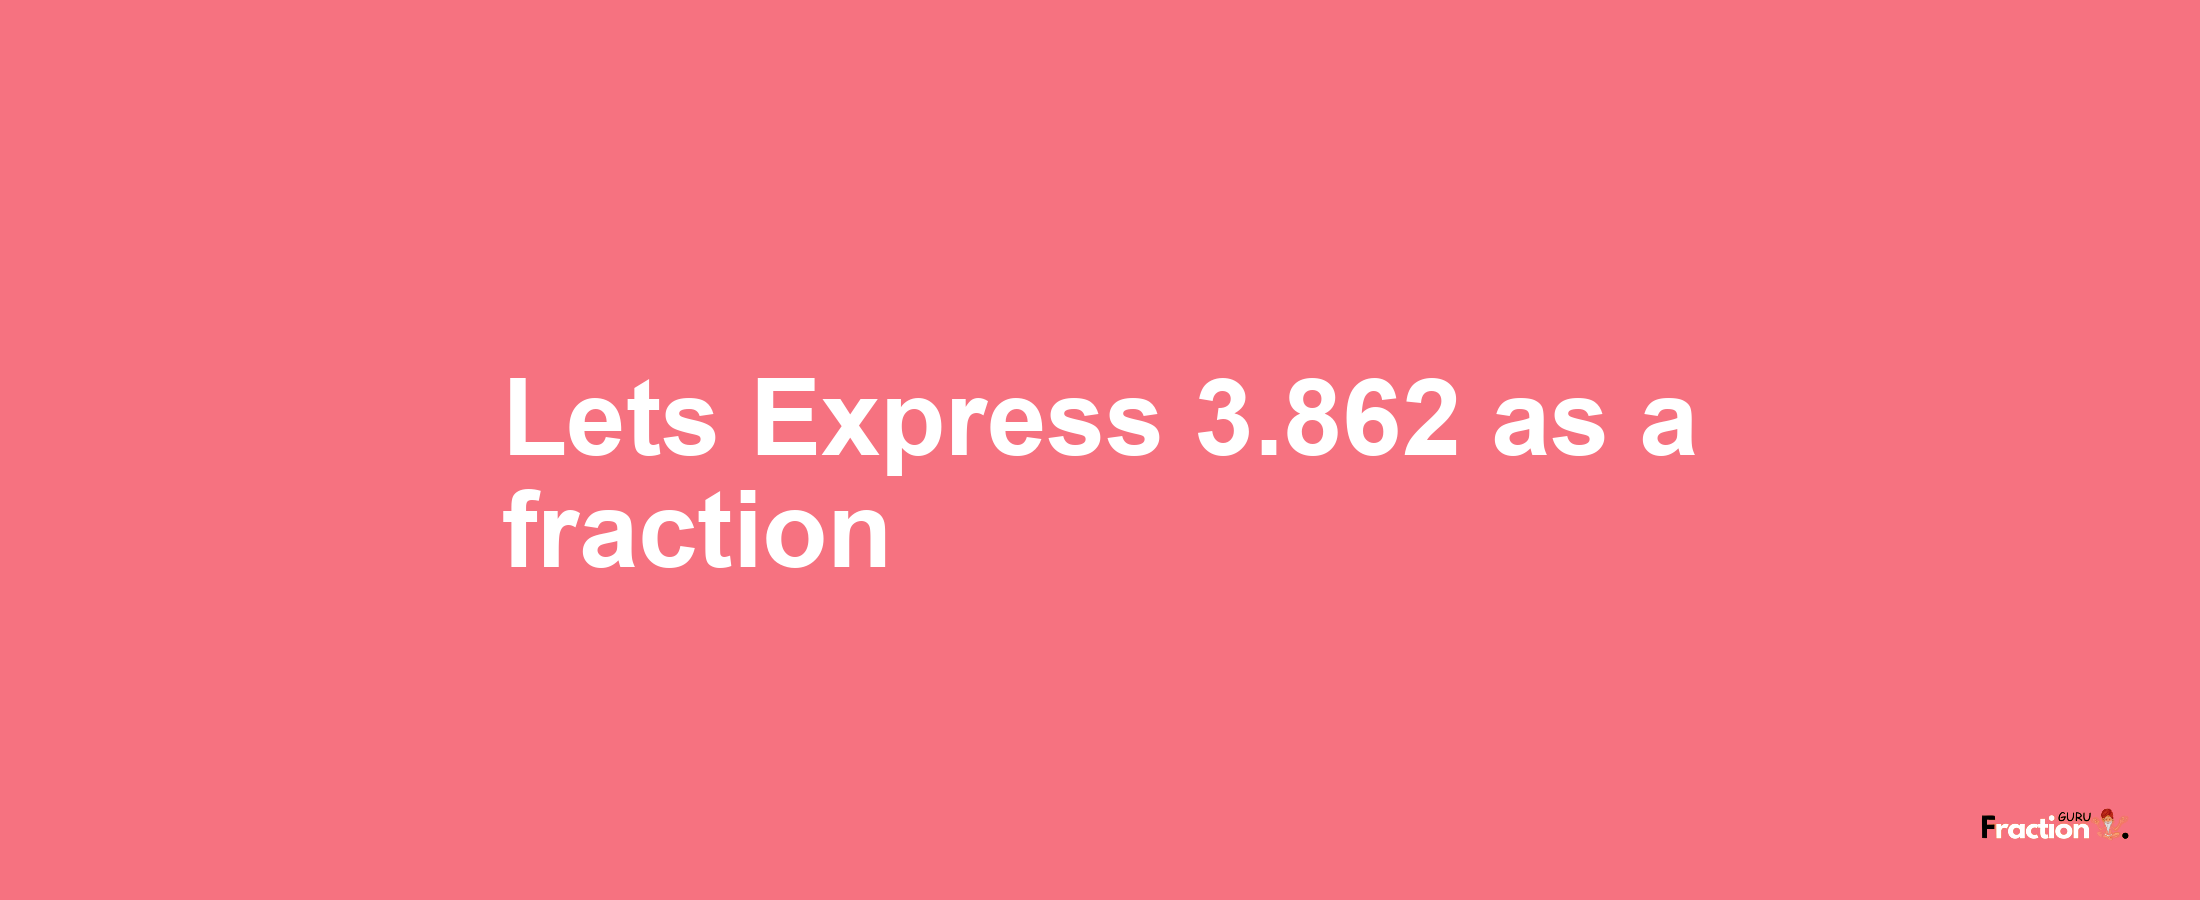 Lets Express 3.862 as afraction